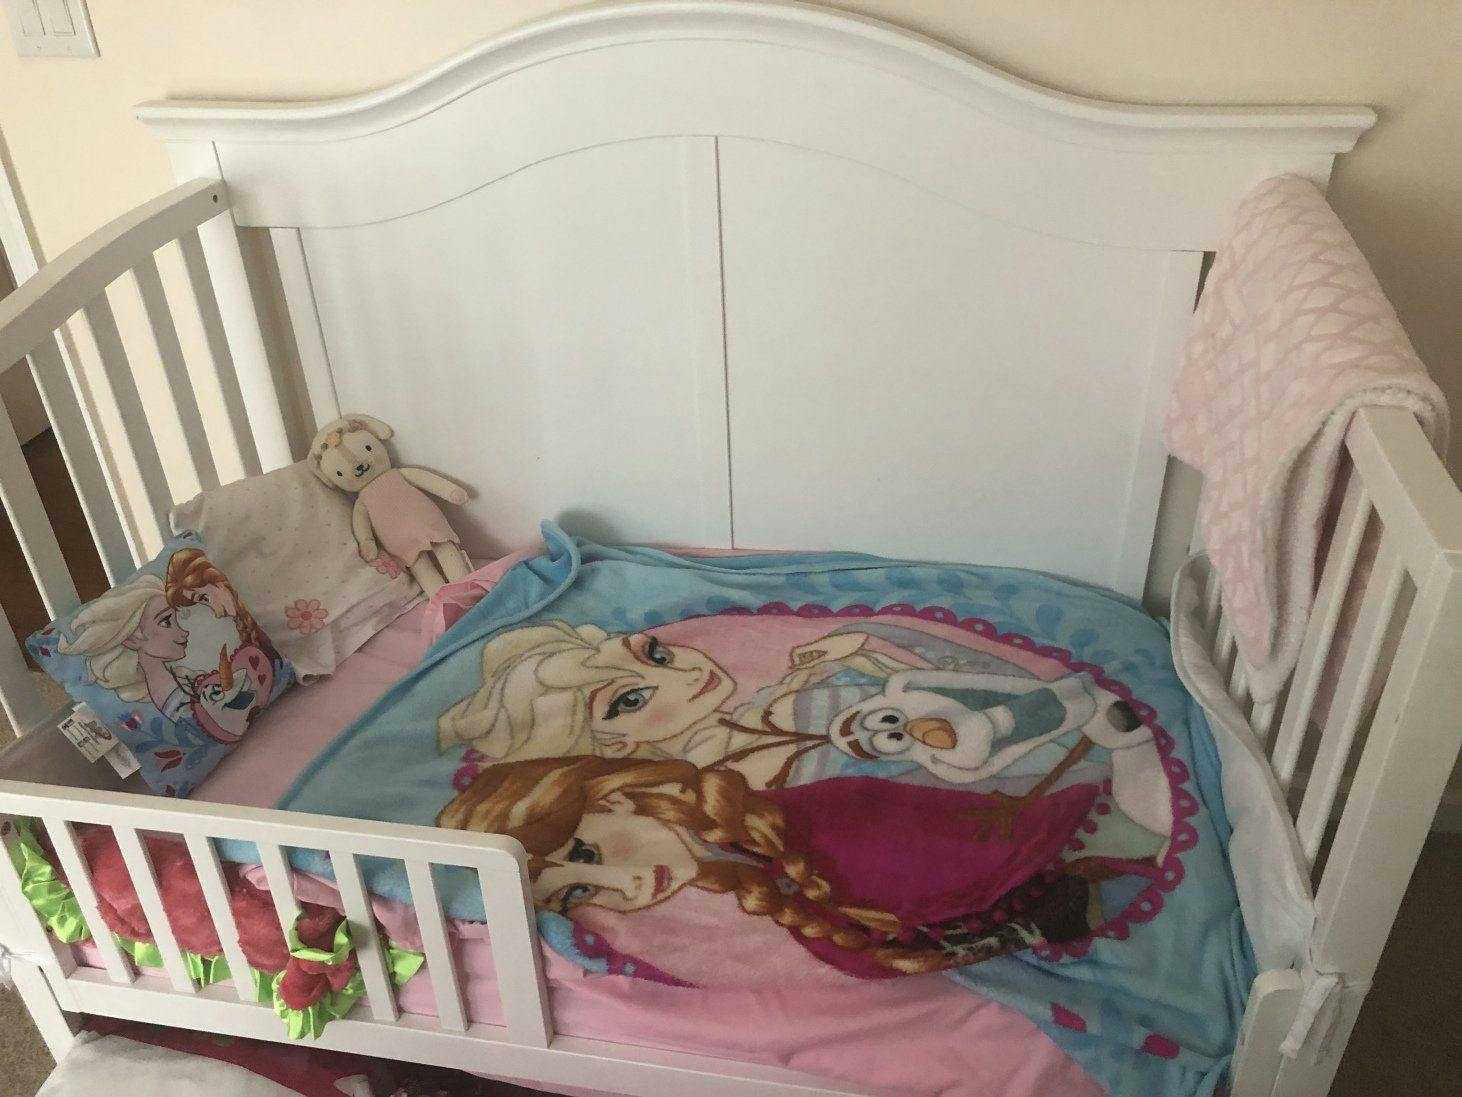 7 Tips for Transitioning from a Crib to a Toddler Bed